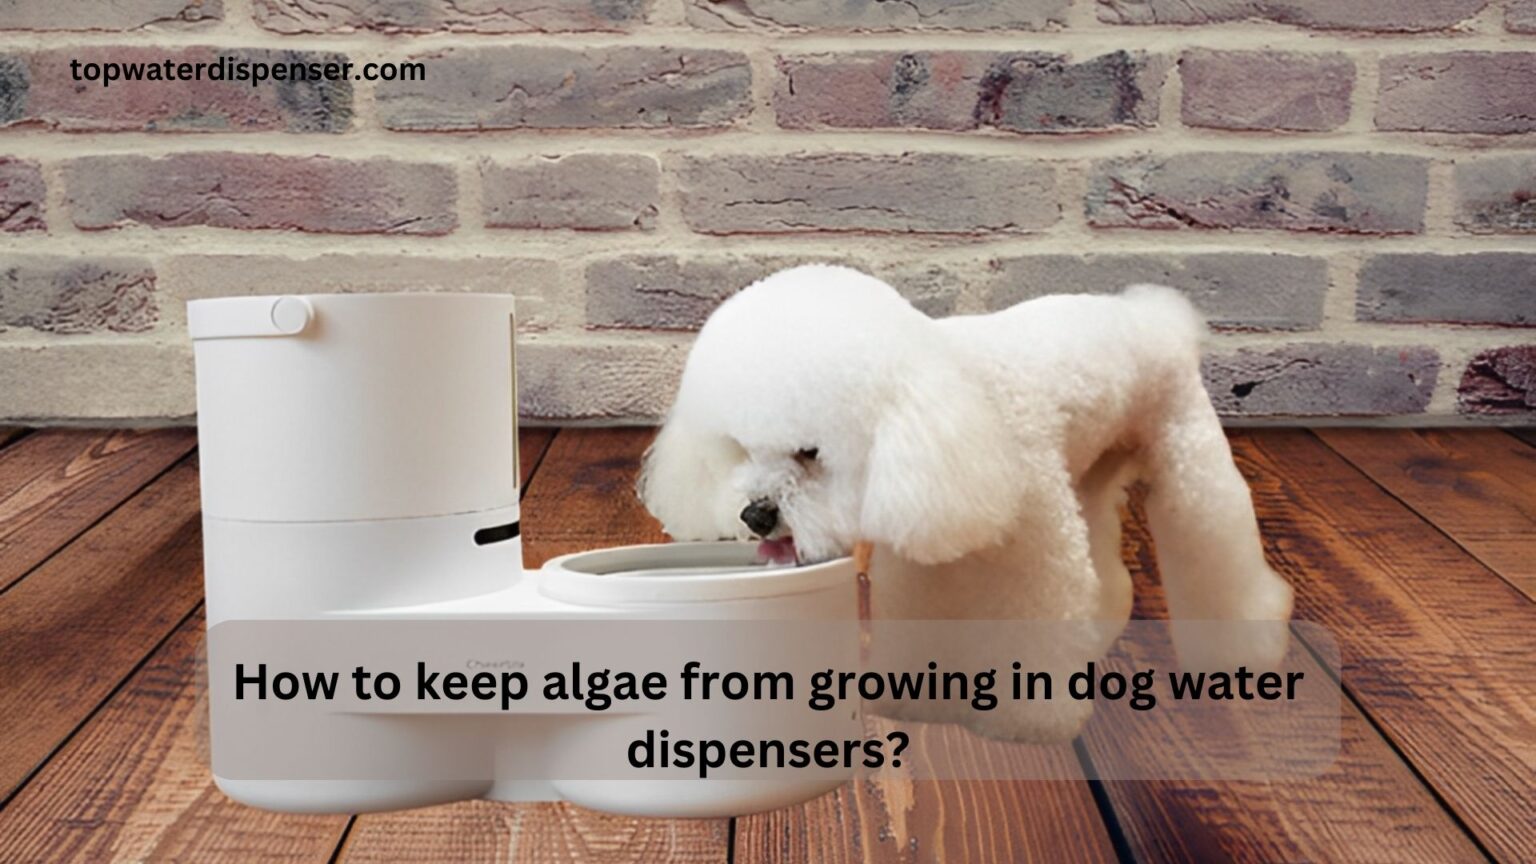 How to keep algae from growing in dog water dispensers?